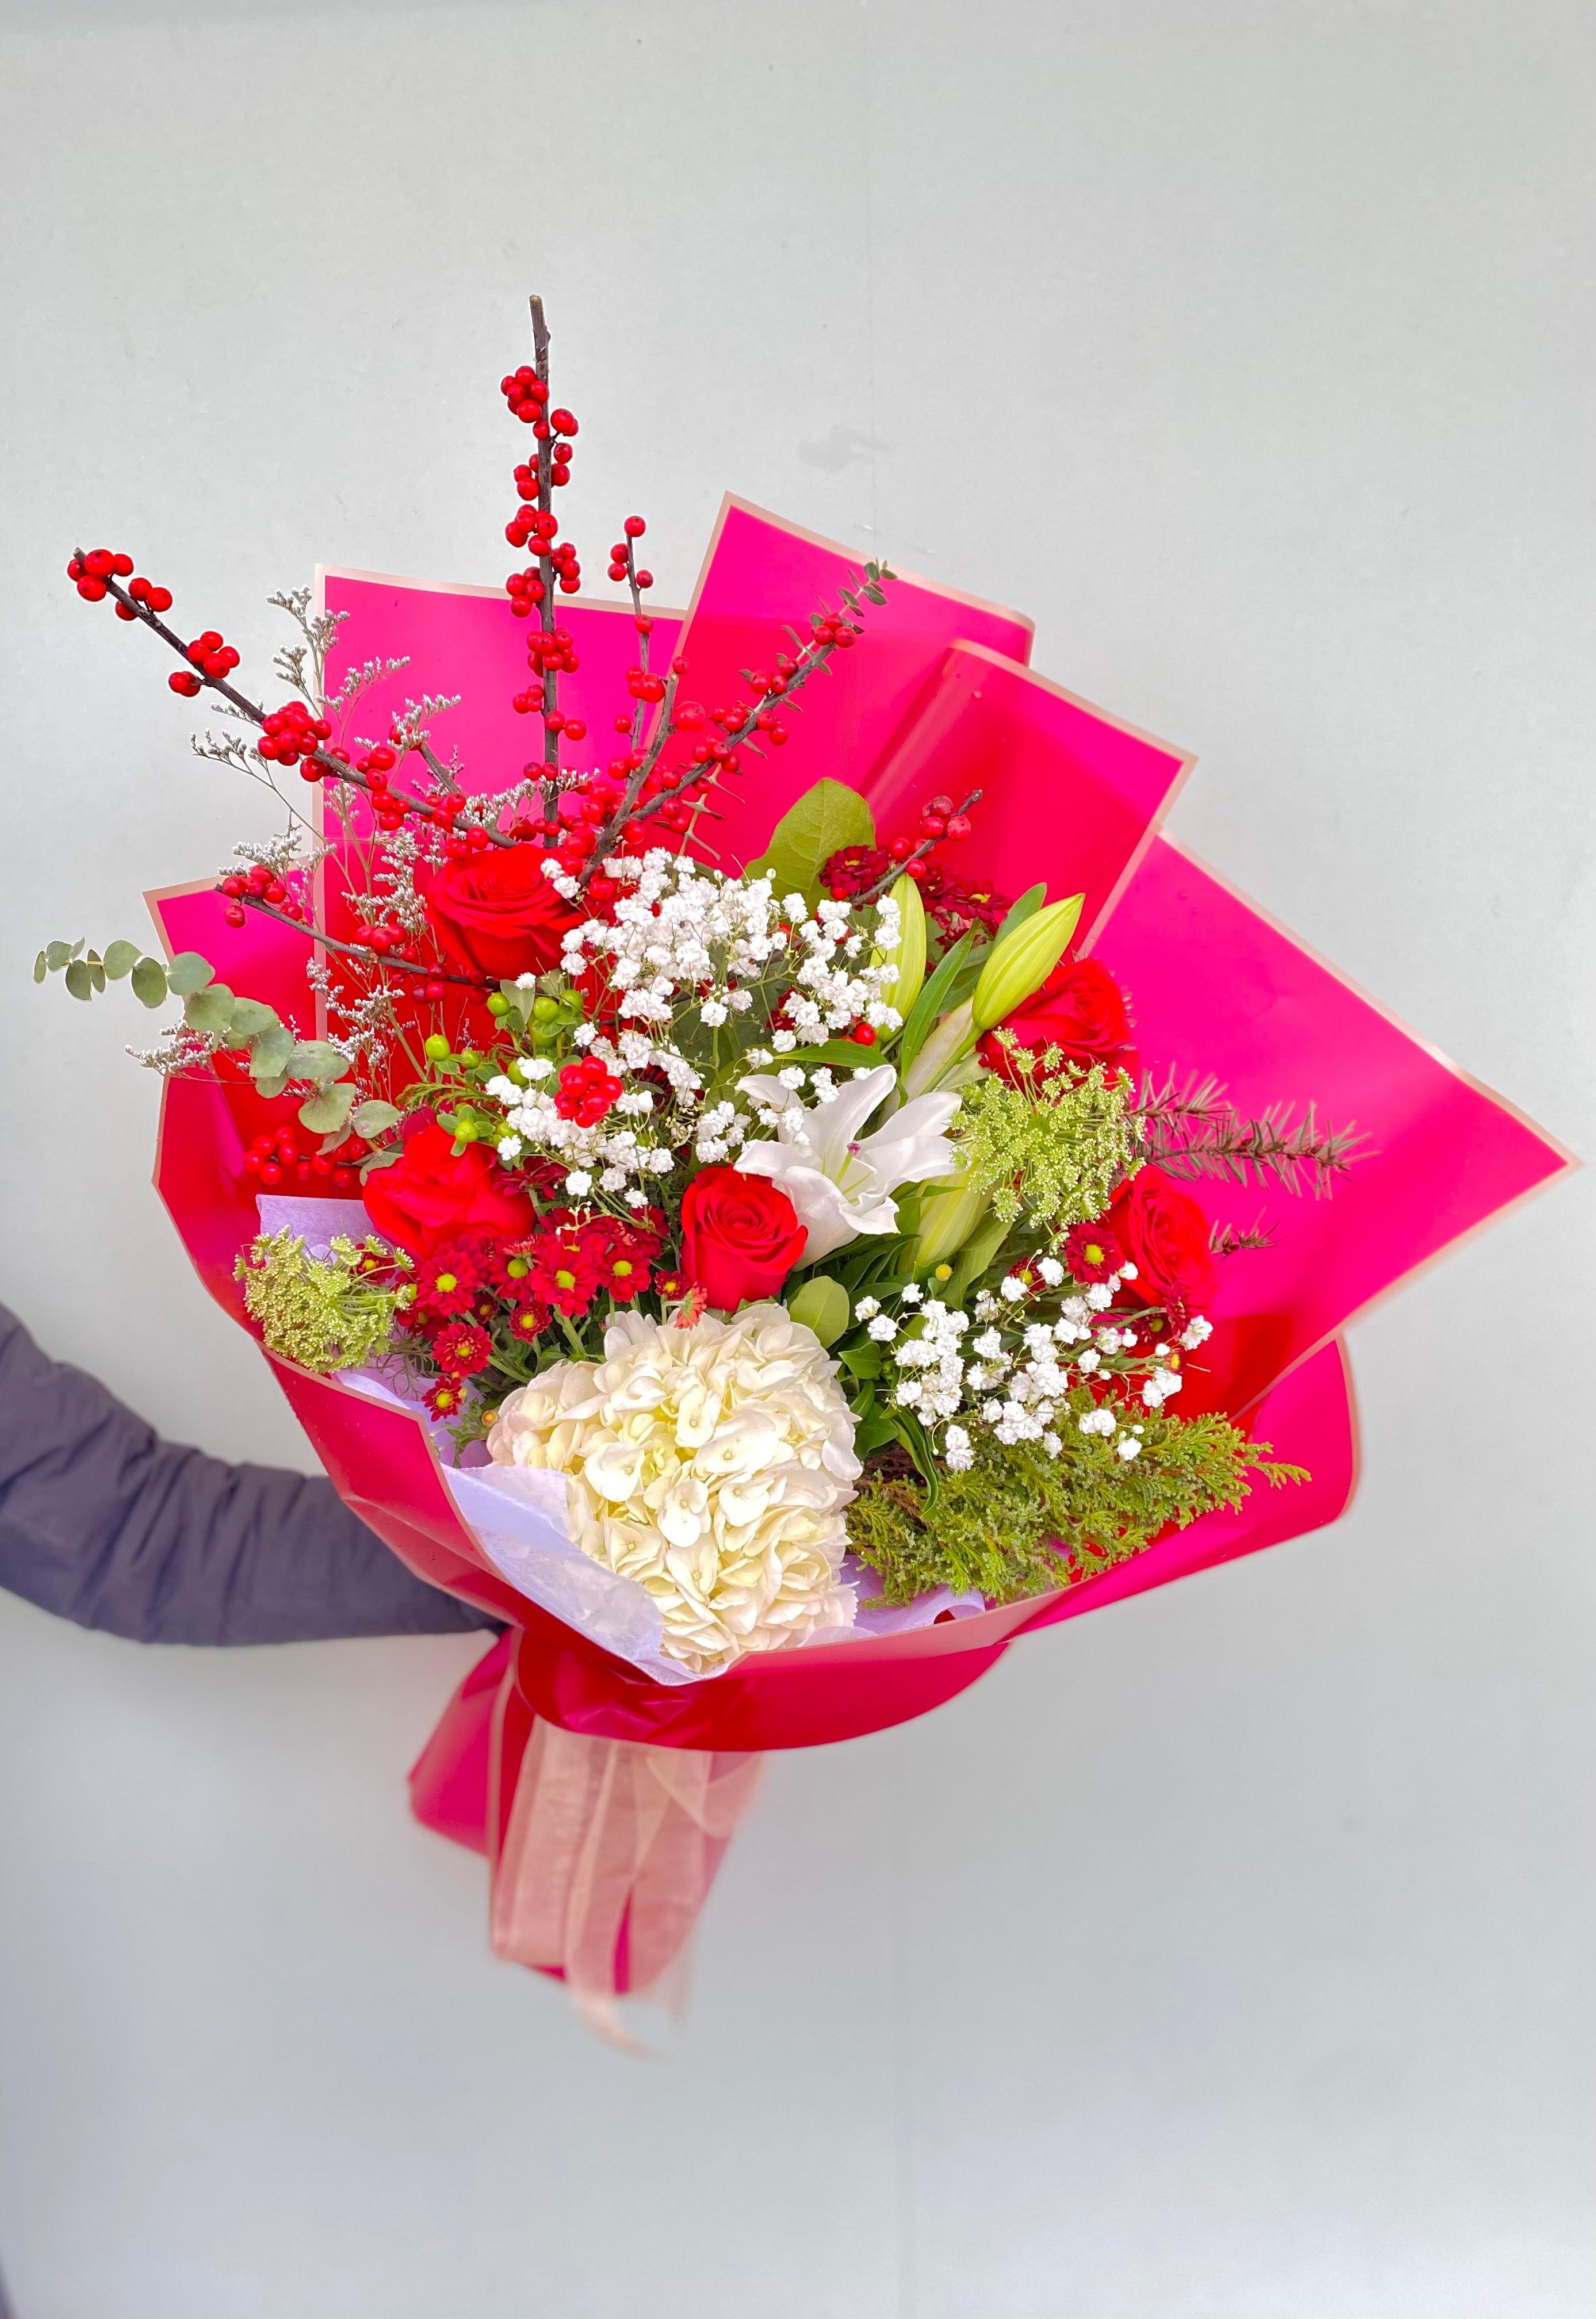 Designer’s Choice Holiday Handtied bouquet - Four Seasons Floristry